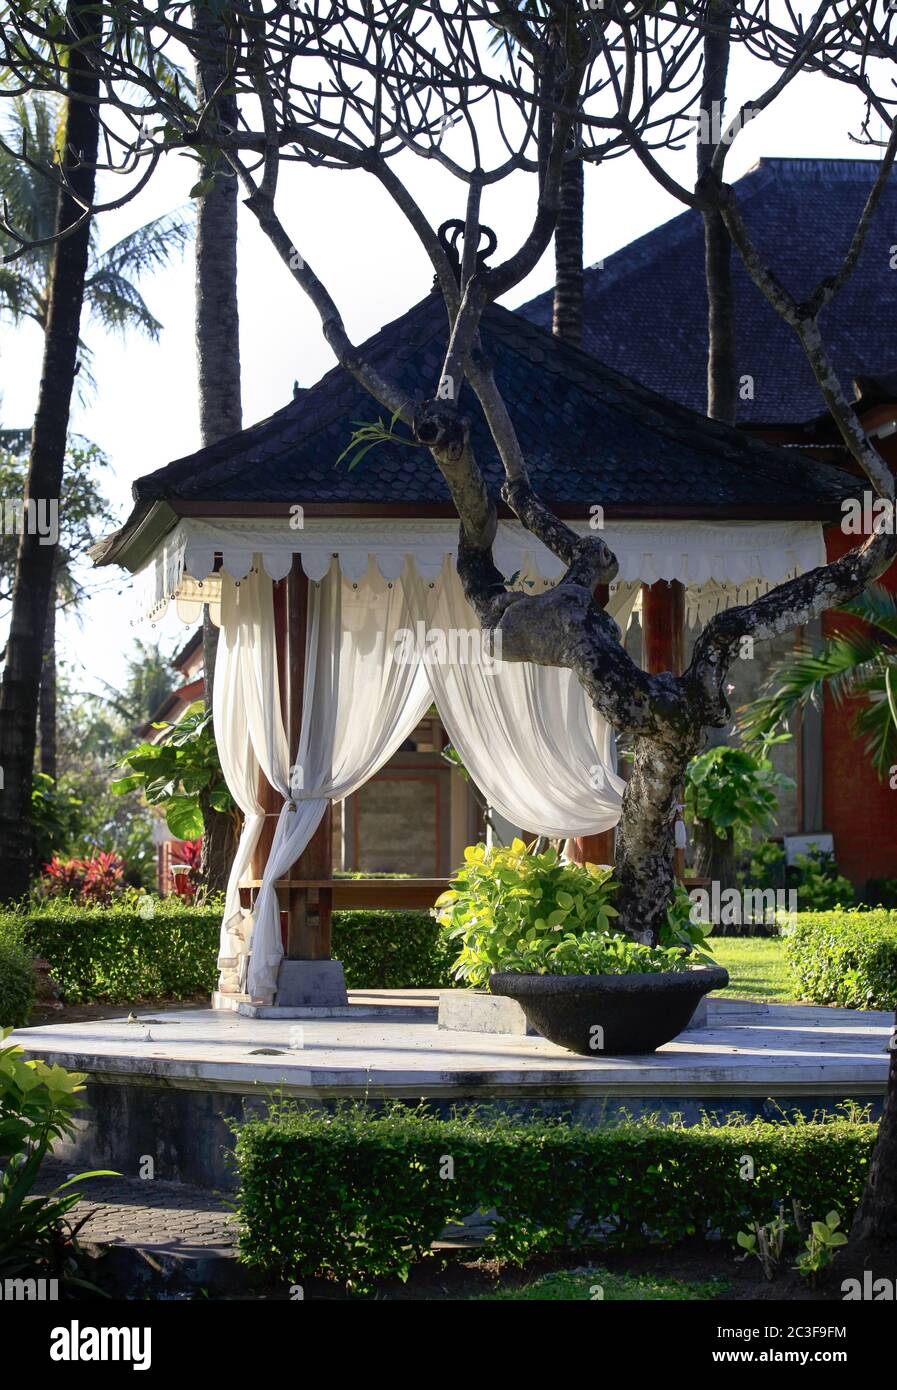 Arbor with white curtains for relaxation or meditation. Bali Island, Indonesia Stock Photo